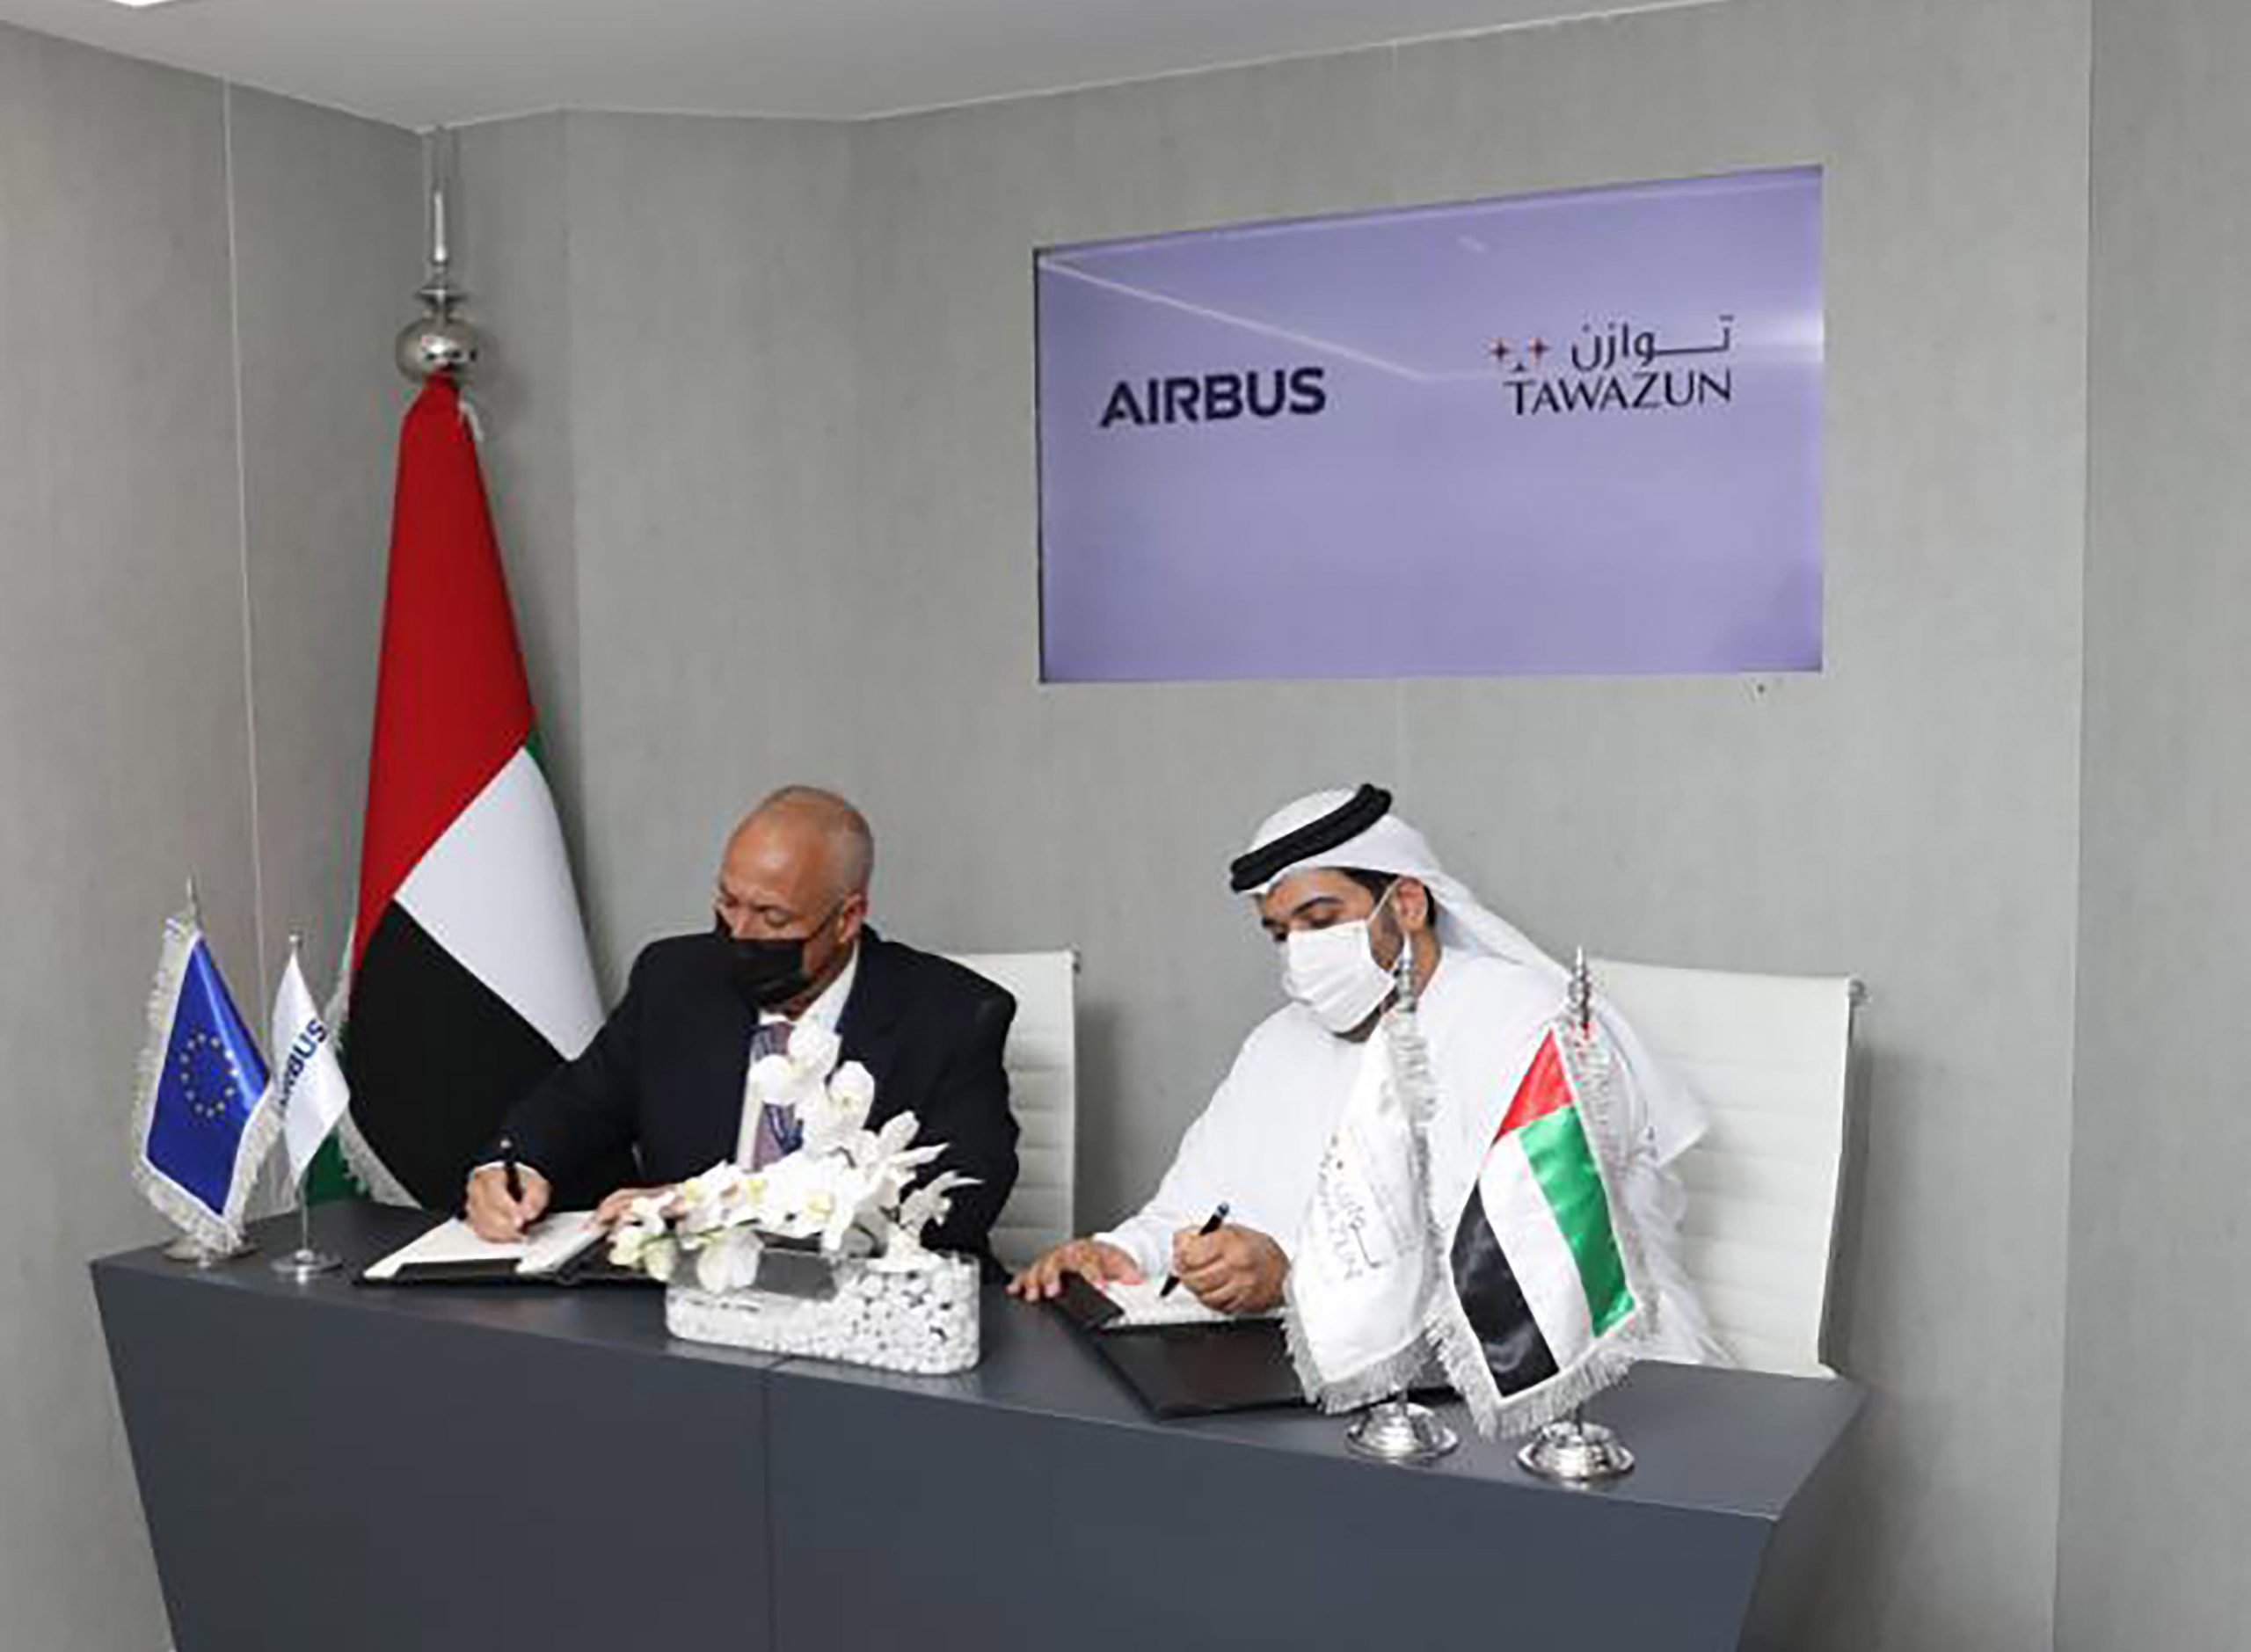 Tawazun and Airbus to expand their partnership with potential establishment of a new Abu Dhabi subsidiary